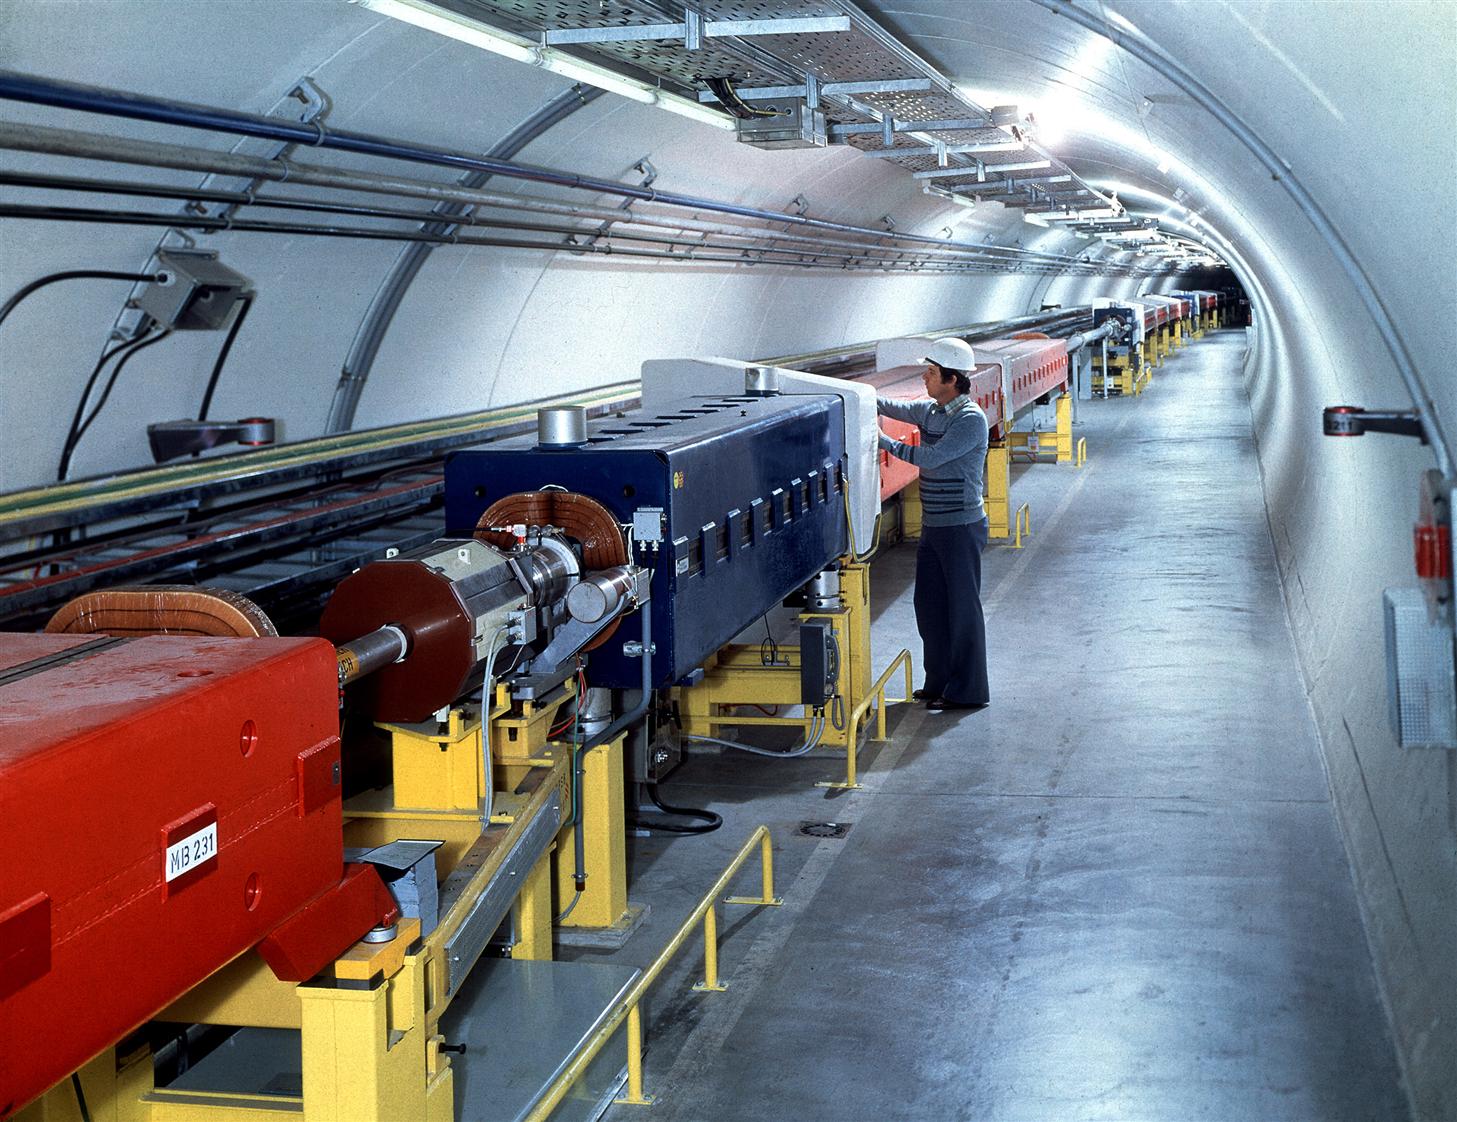 The Super Proton Synchrotron (SPS) tunnel. Particle beams enter the SPS at 26 GeV, which then accelerates the beam up to 450 GeV. (Image: CERN)